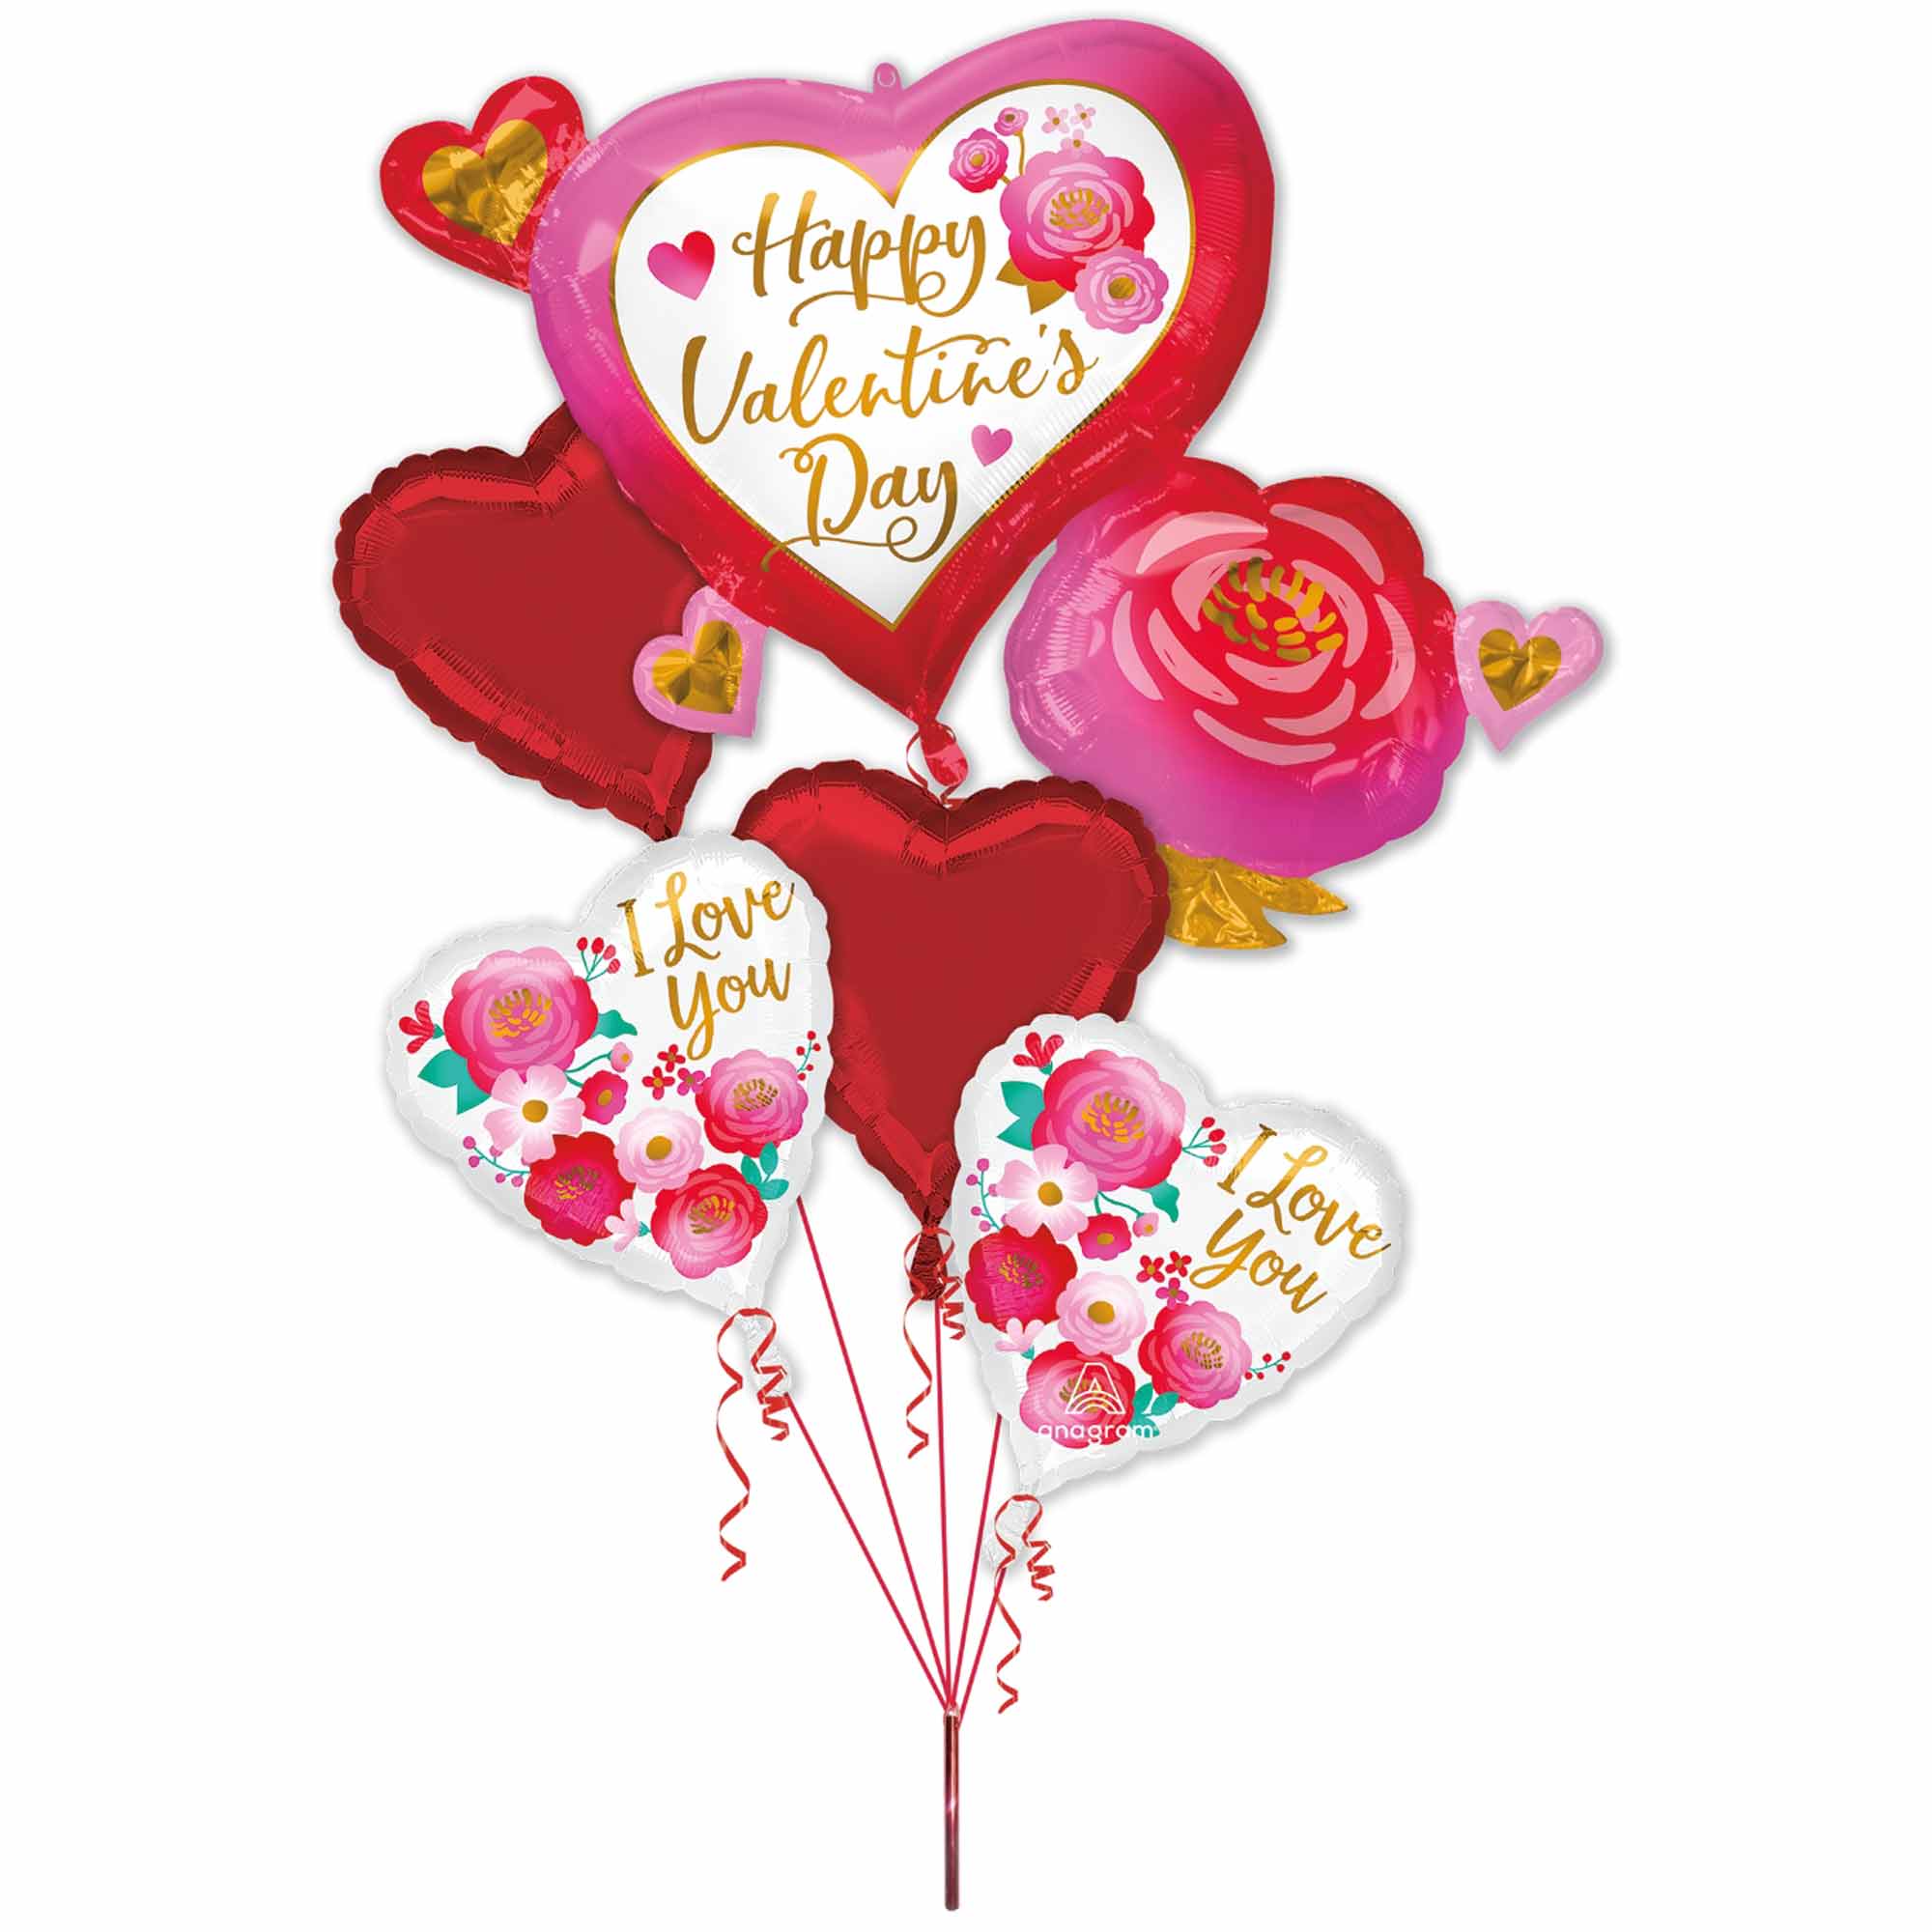 Happy Valentines Day Heart & Rose Balloon Bouquet 5pcs Balloons & Streamers - Party Centre